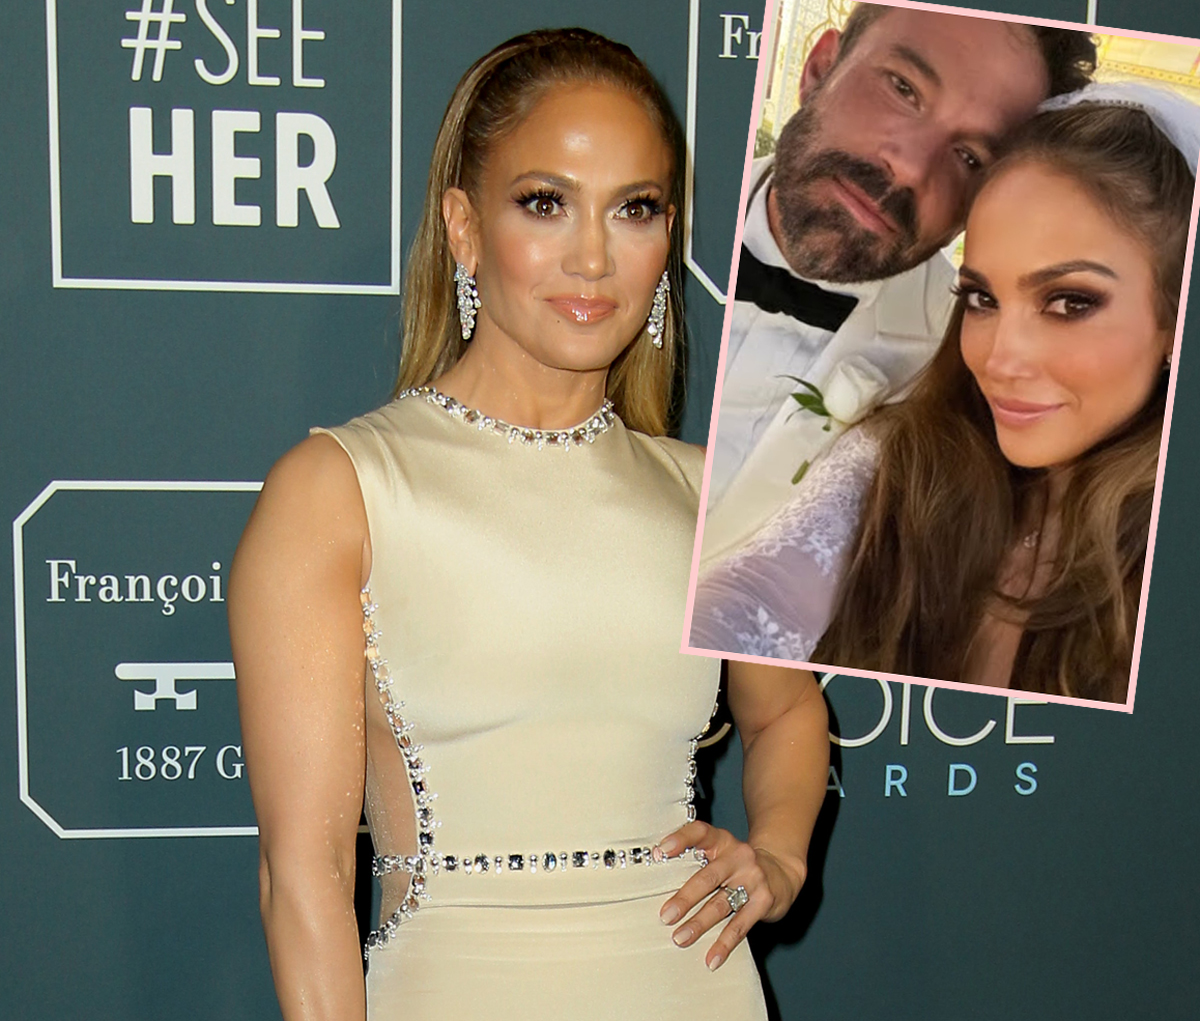 #Jennifer Lopez Shares The First Pictures From Her Wedding To Ben Affleck!